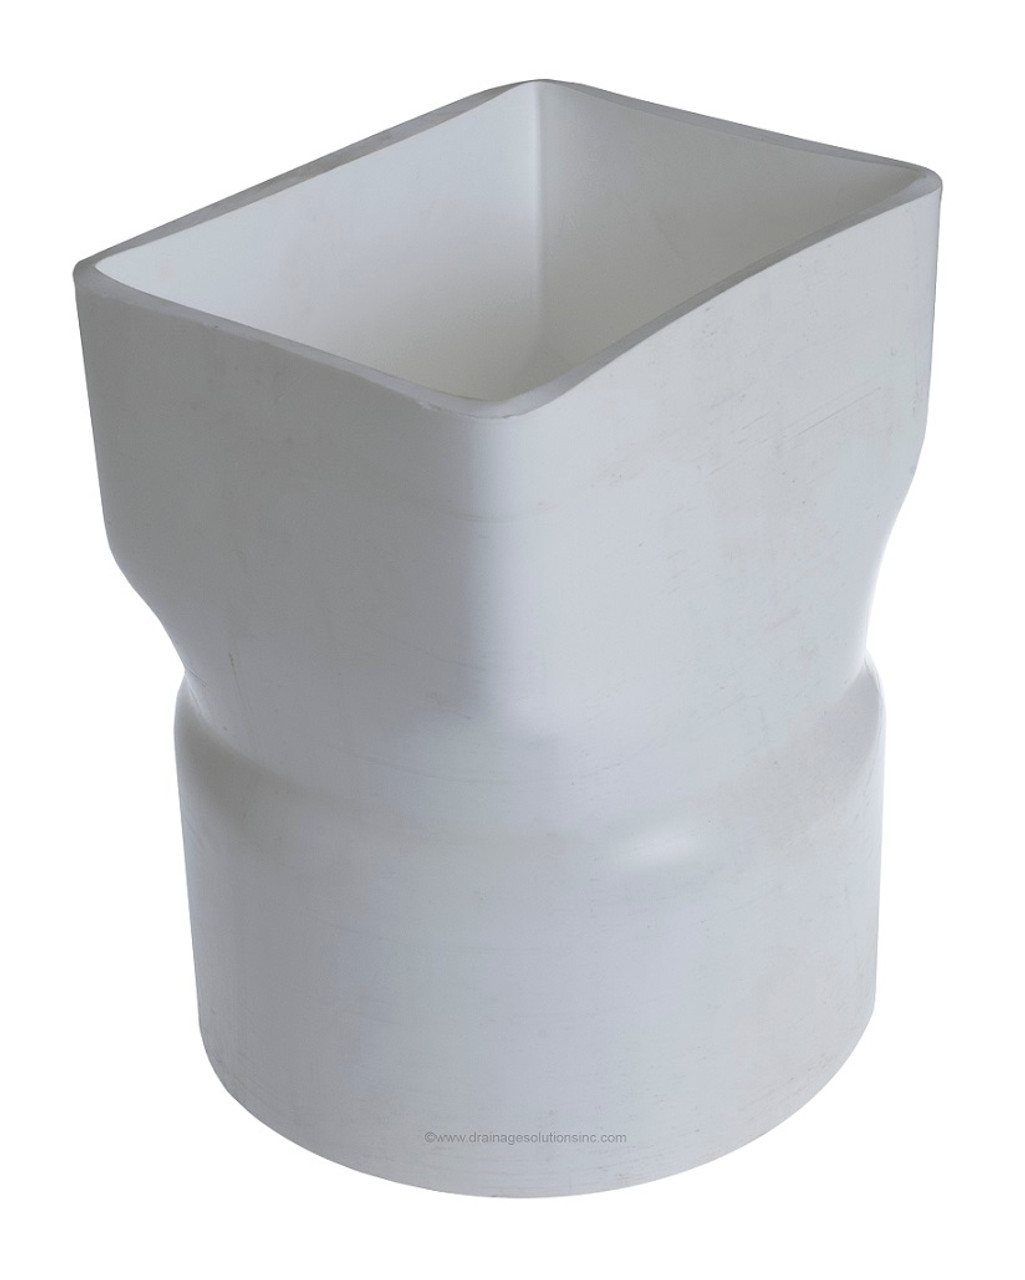  PVC  5 x 6 x 6 IPS Downspout  Adapter Centered DSA x 